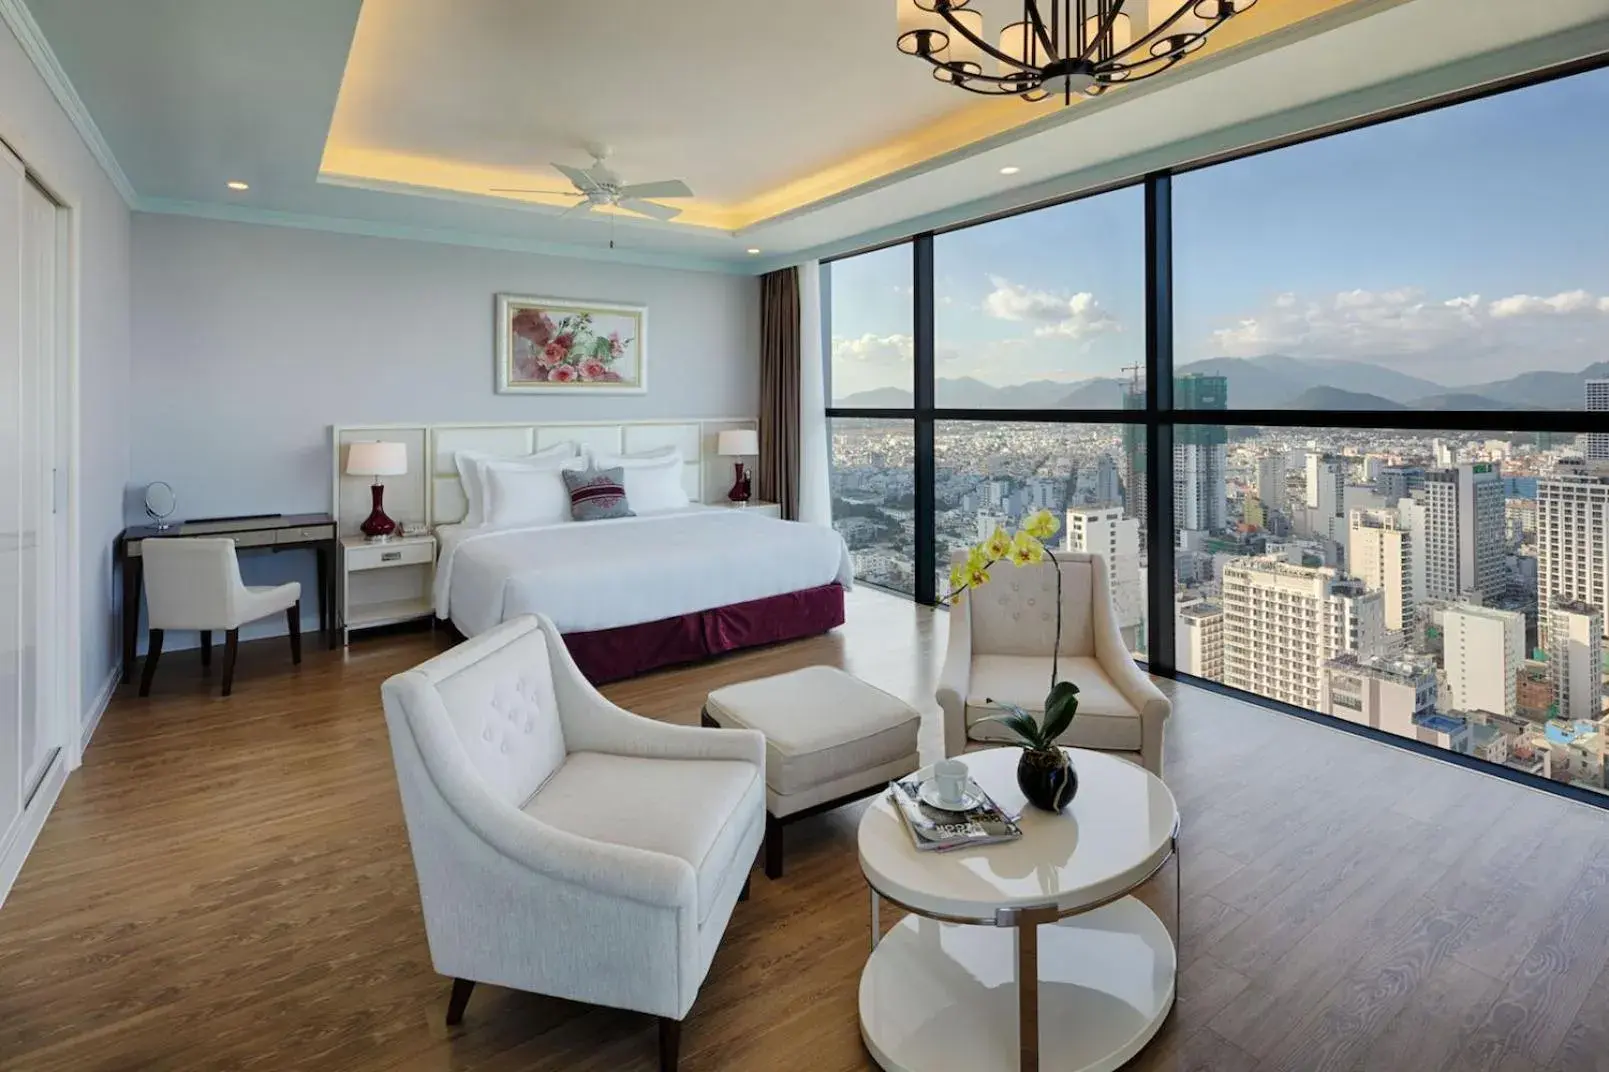 Photo of the whole room in Vinpearl Beachfront Nha Trang